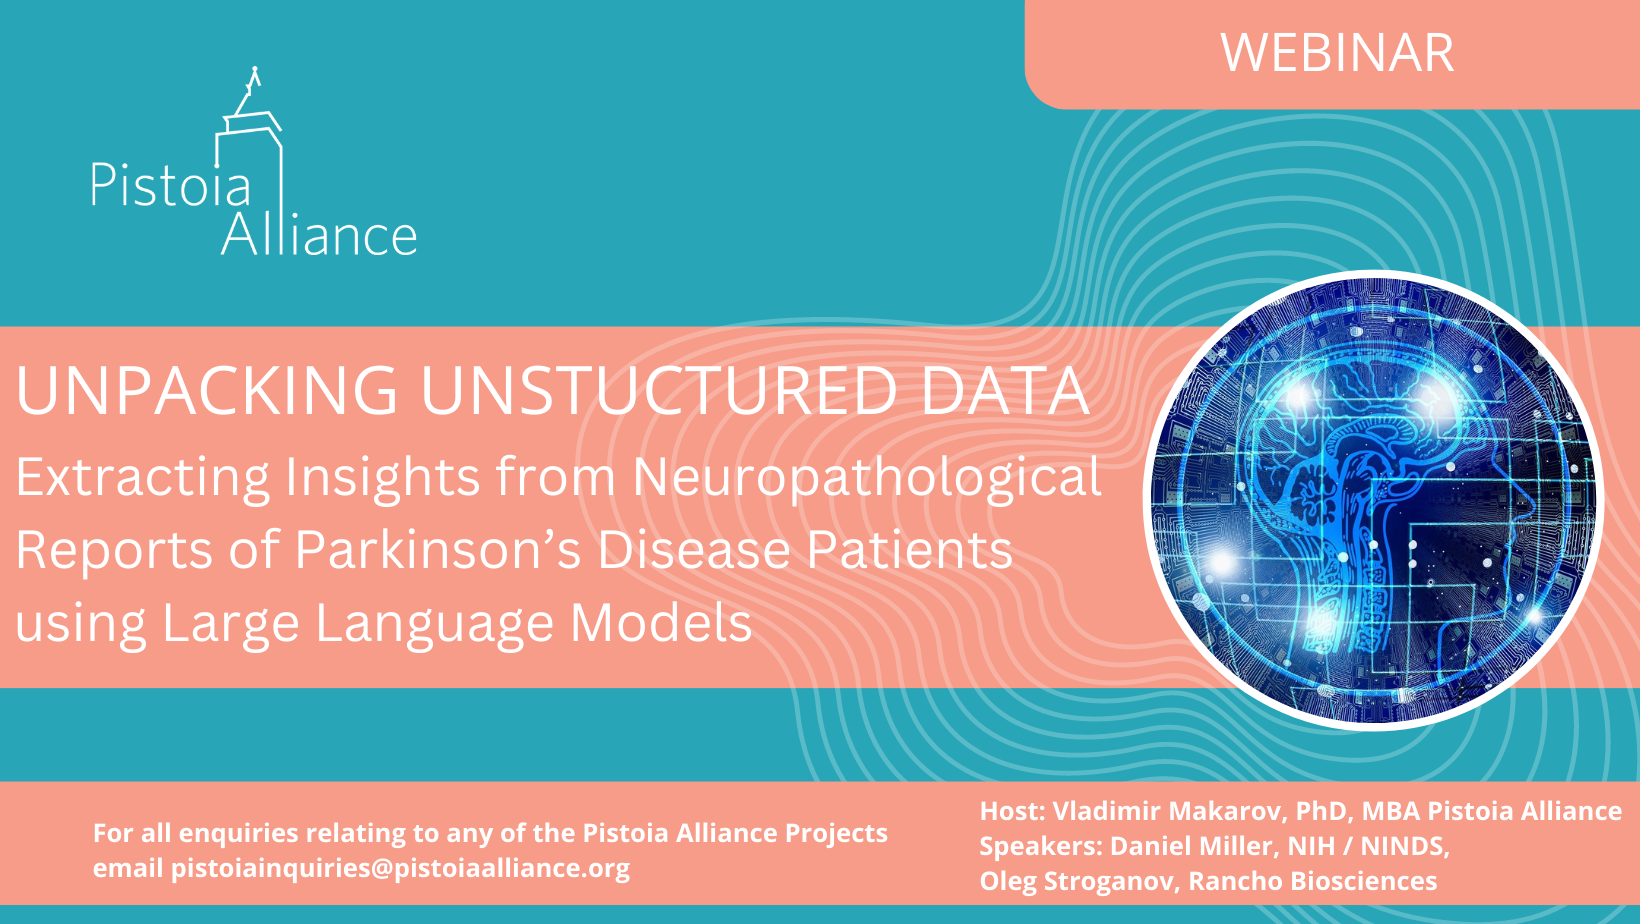 Unpacking Unstructured Data: Extracting Insights from Neuropathological Reports of Parkinson’s Disease Patients using Large Language Models